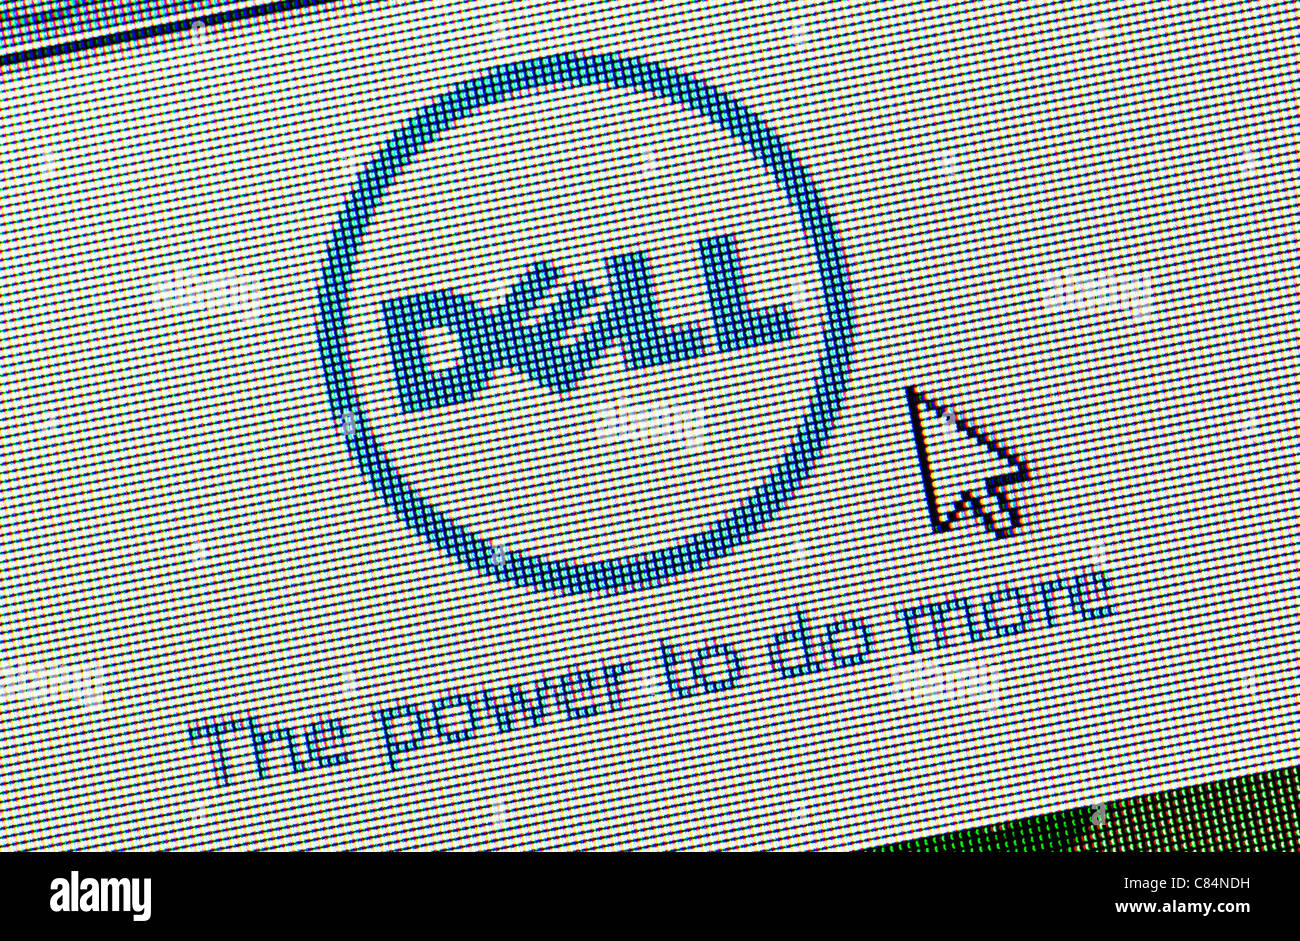 Dell logo and website close up Stock Photo